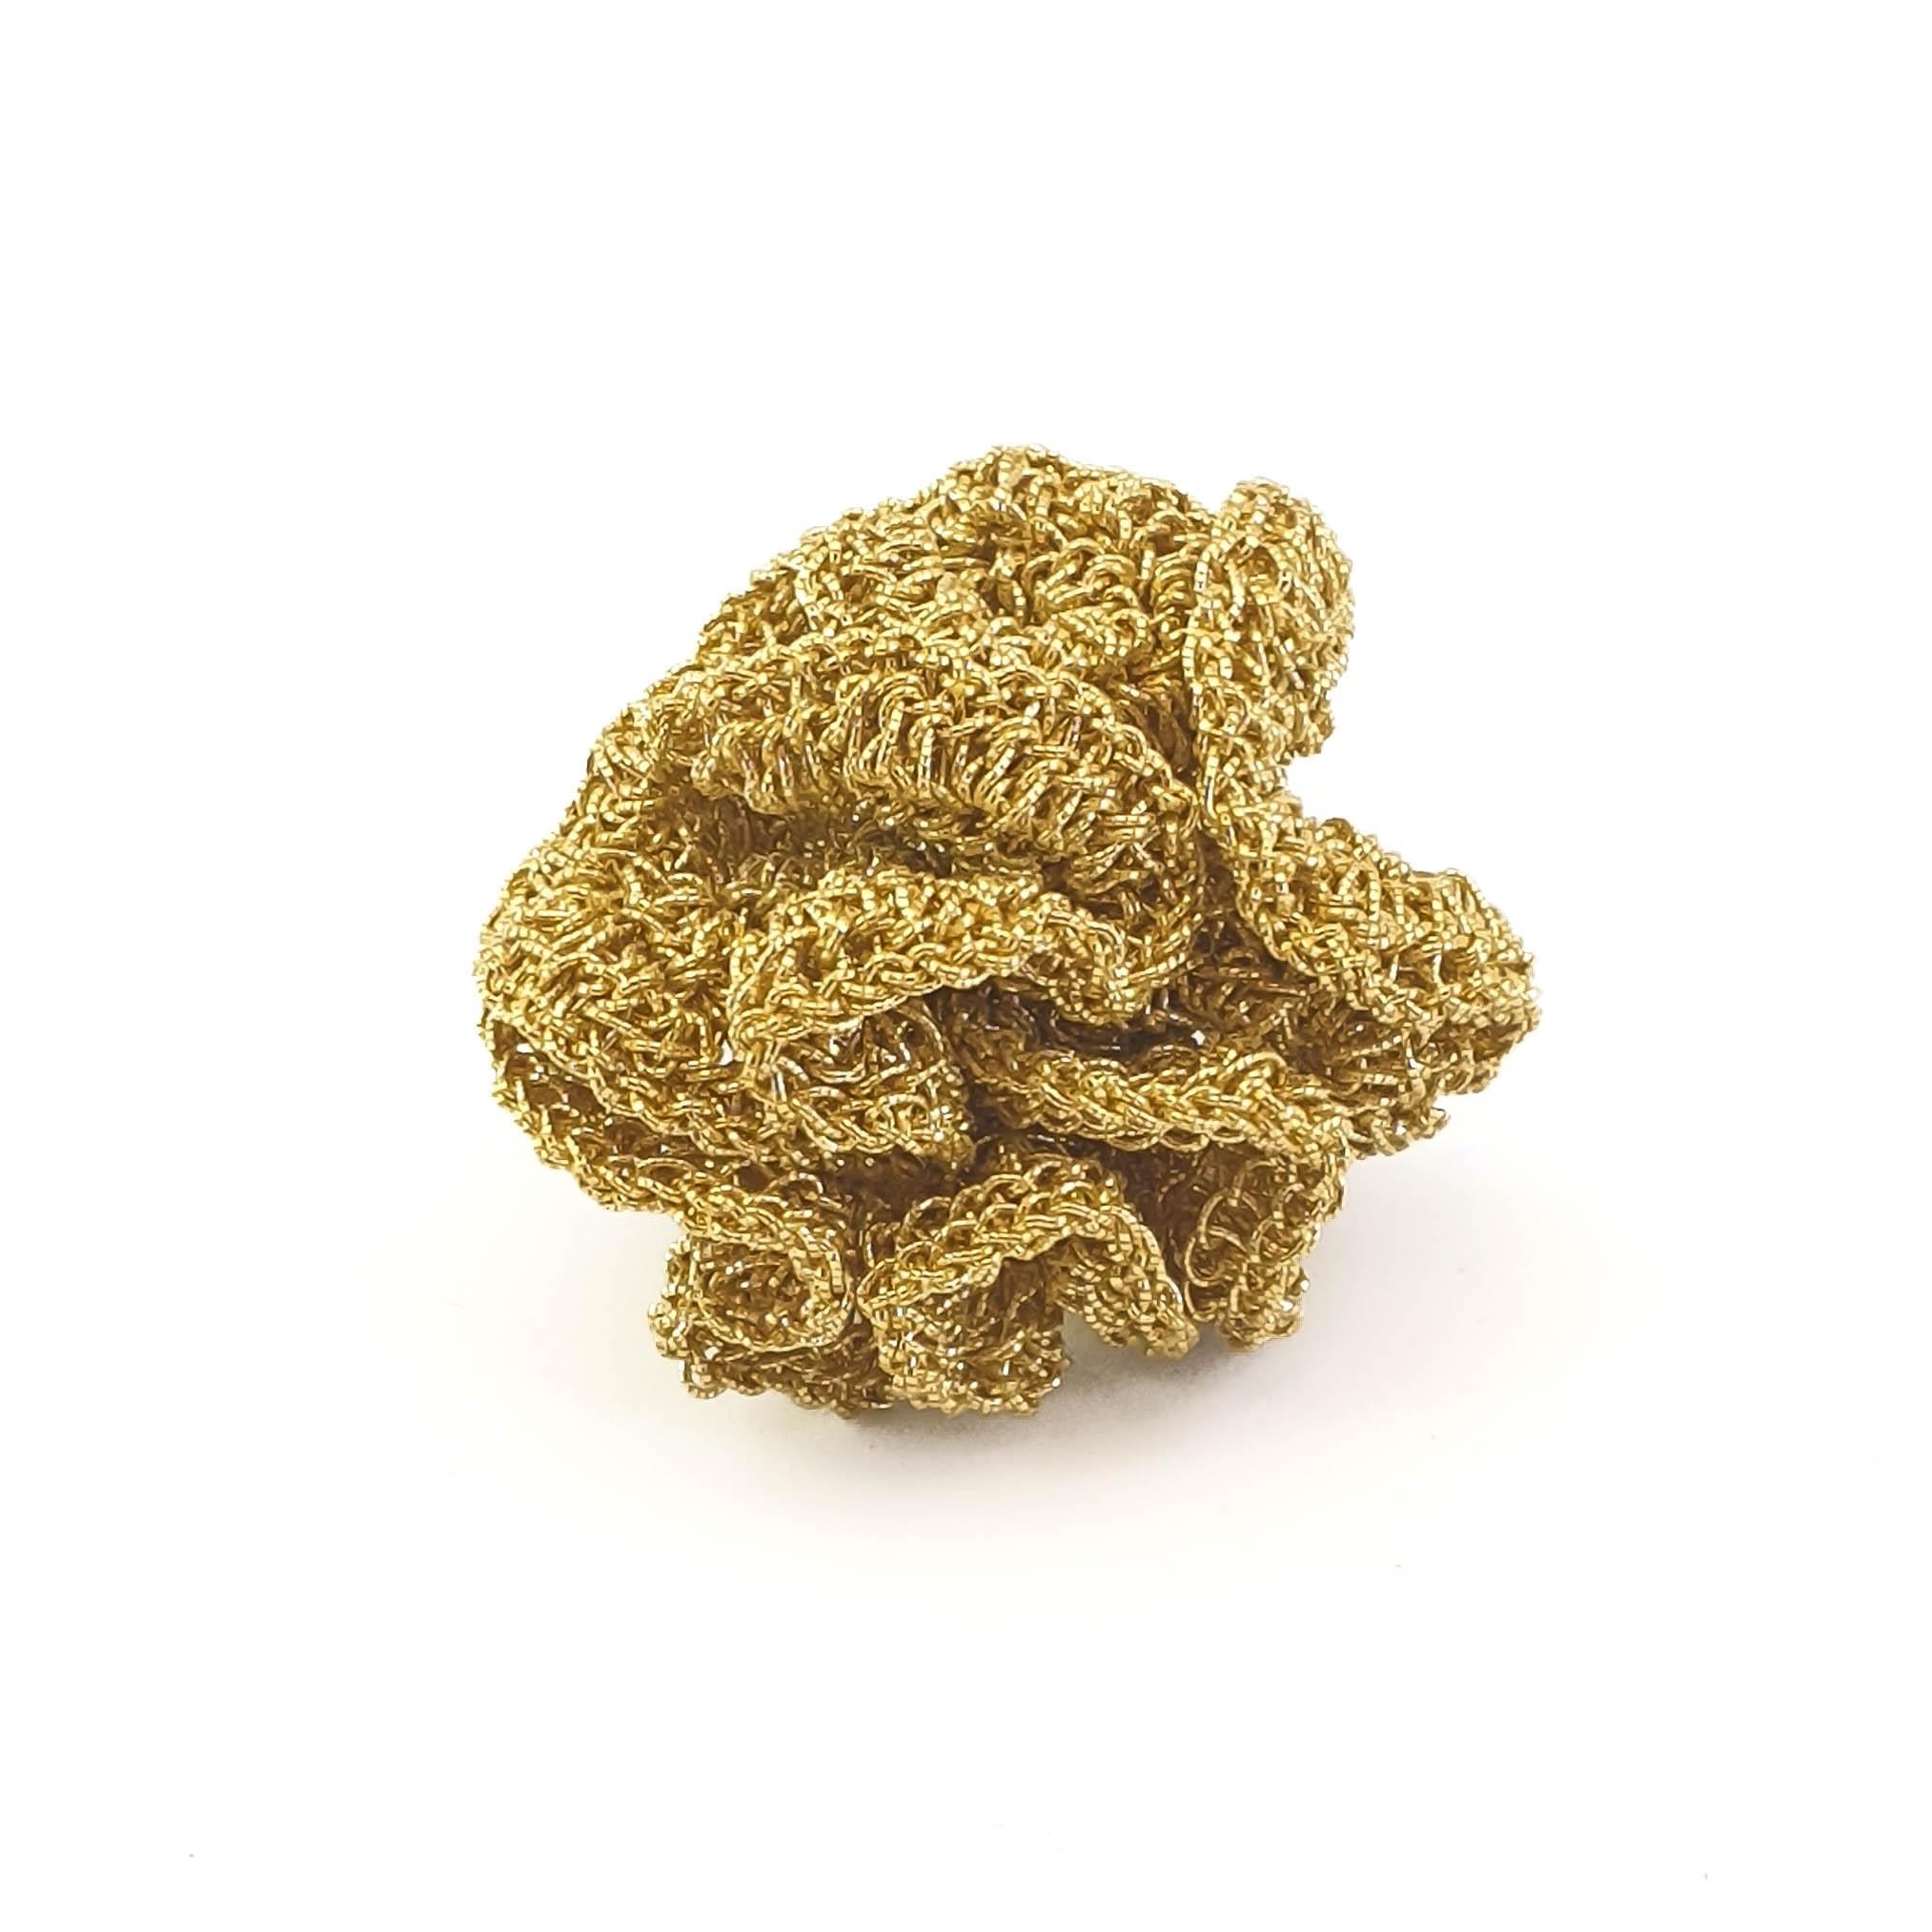 Hand crochet 18 karat gold thread cocktail ring. This ring is a one of kind statement piece in the Art Nouveau style
Weight of ring 11 grams